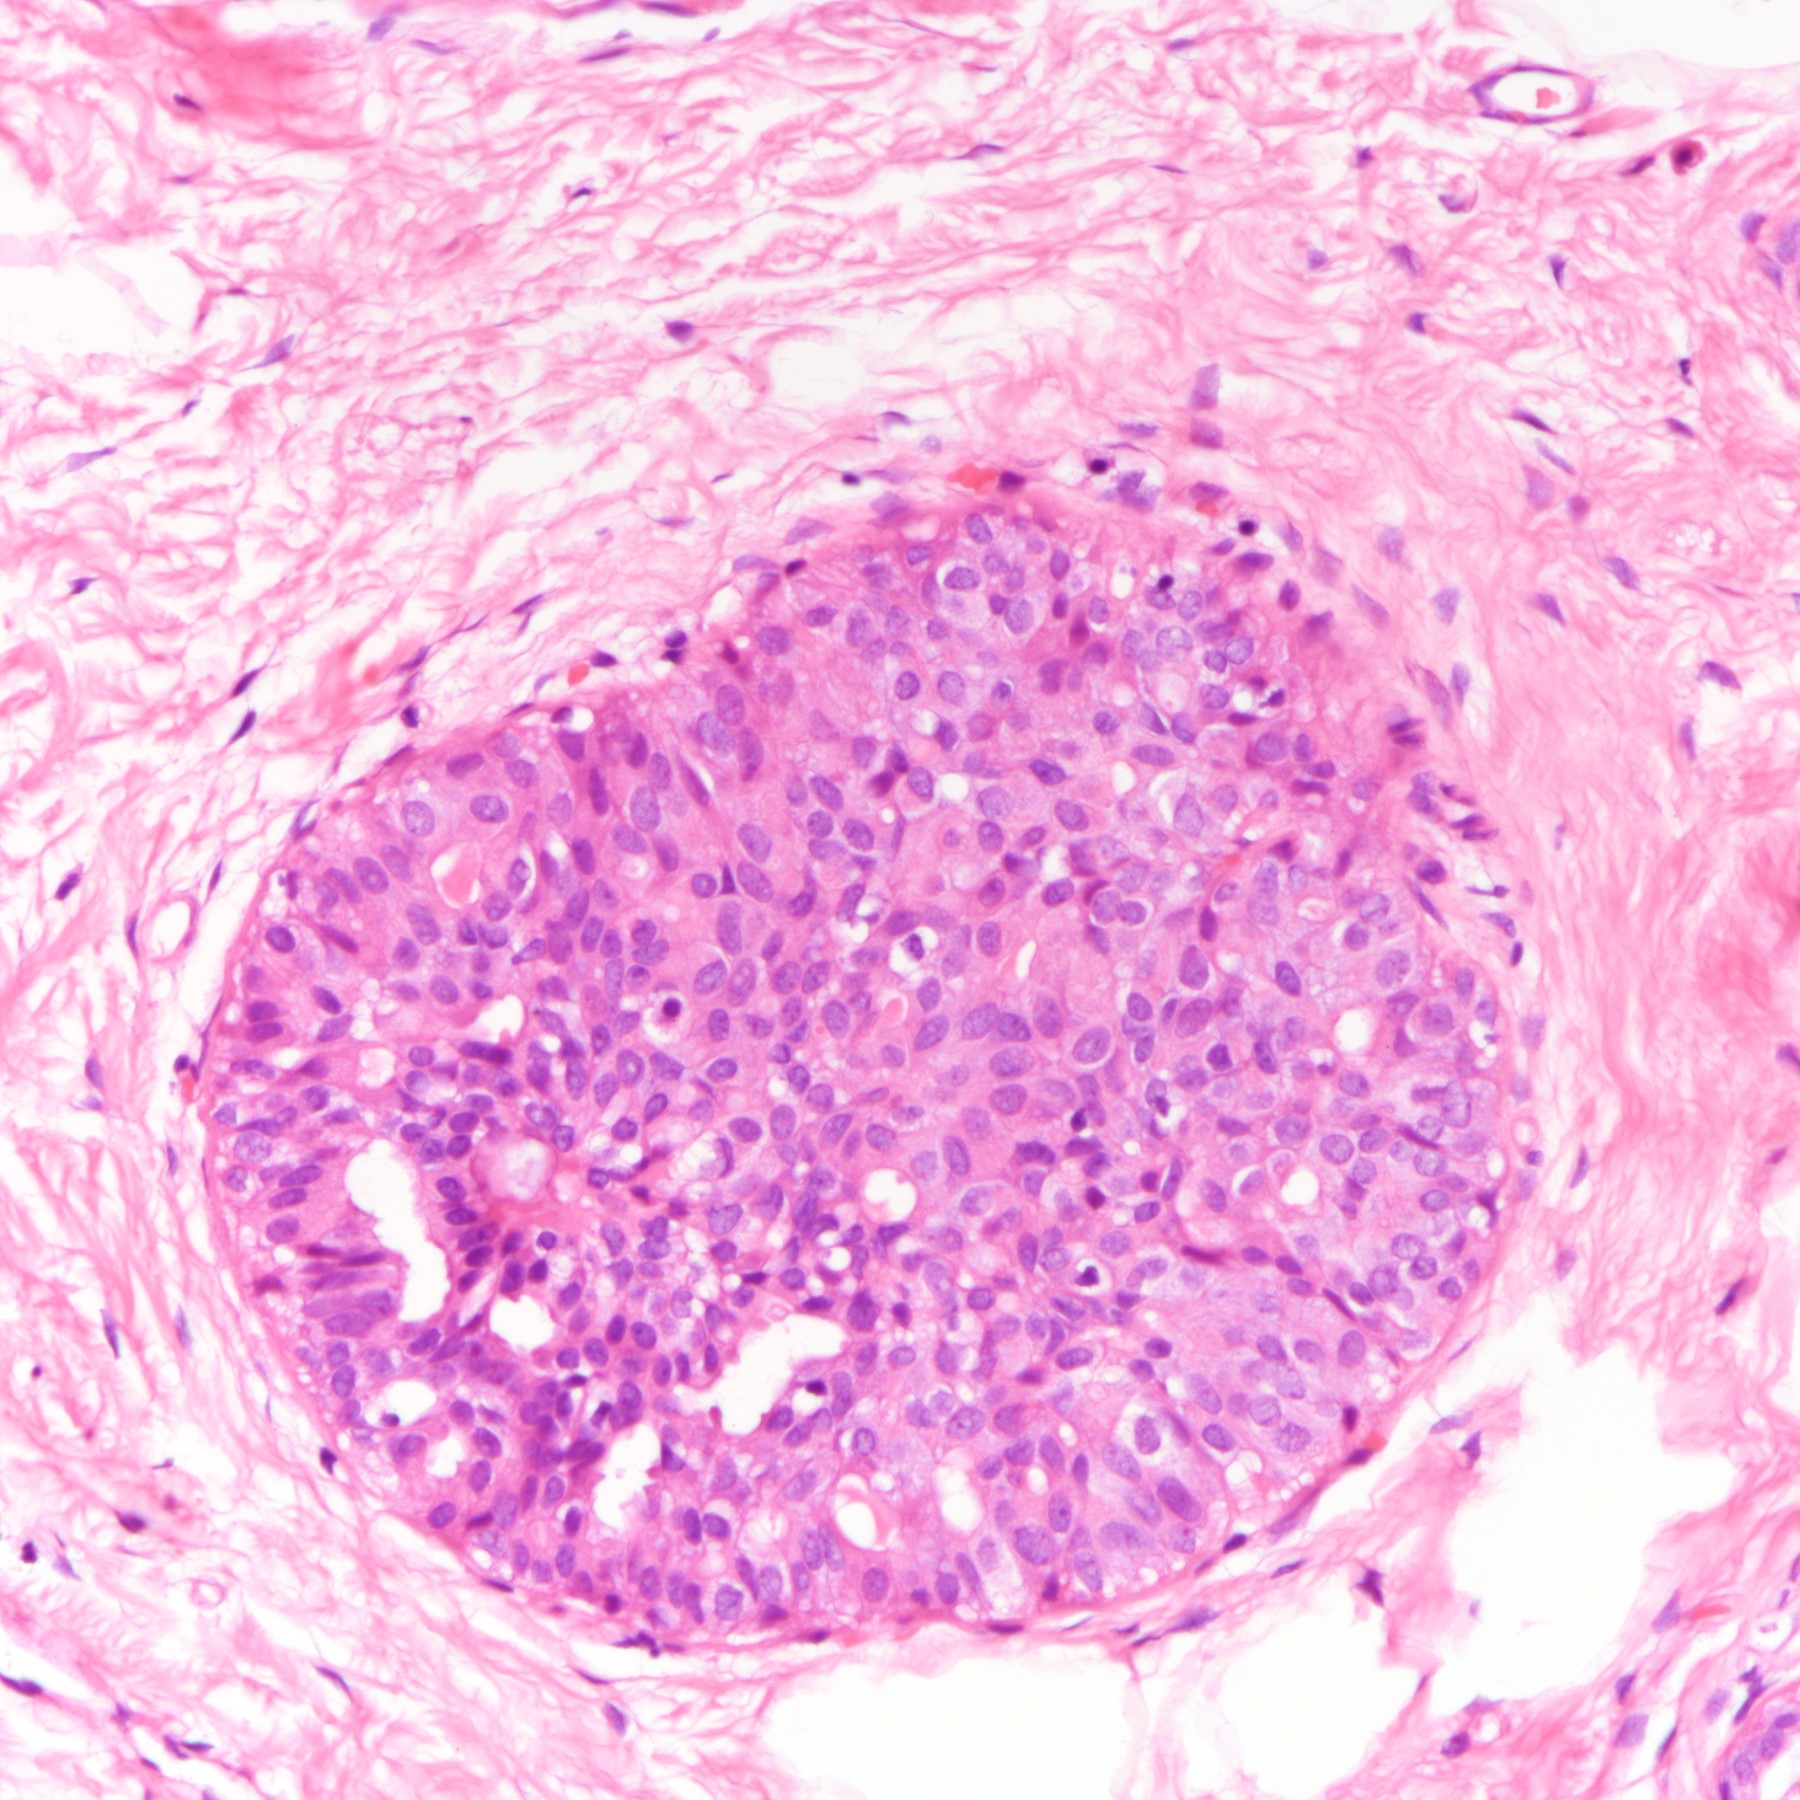 Atypical ductal hyperplasia